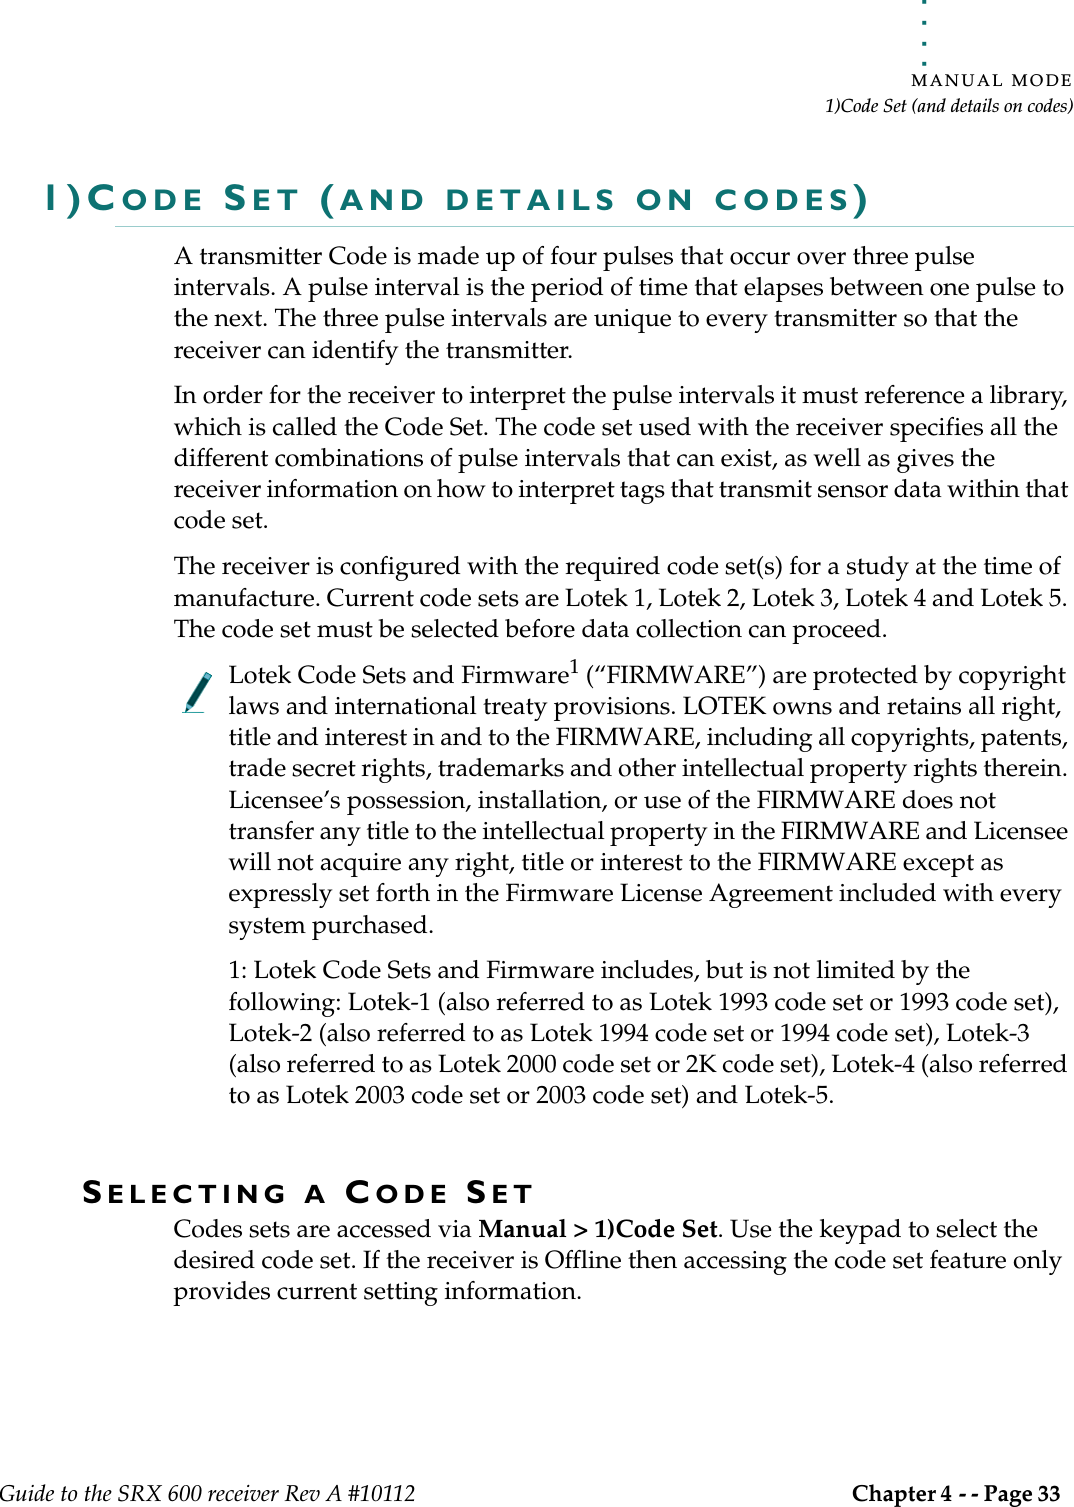 . . . . .MANUAL MODE1)Code Set (and details on codes)Guide to the SRX 600 receiver Rev A #10112 Chapter 4 - - Page 33 1)CODE SET (AND DETAILS ON CODES)A transmitter Code is made up of four pulses that occur over three pulse intervals. A pulse interval is the period of time that elapses between one pulse to the next. The three pulse intervals are unique to every transmitter so that the receiver can identify the transmitter.In order for the receiver to interpret the pulse intervals it must reference a library, which is called the Code Set. The code set used with the receiver specifies all the different combinations of pulse intervals that can exist, as well as gives the receiver information on how to interpret tags that transmit sensor data within that code set. The receiver is configured with the required code set(s) for a study at the time of manufacture. Current code sets are Lotek 1, Lotek 2, Lotek 3, Lotek 4 and Lotek 5. The code set must be selected before data collection can proceed.Lotek Code Sets and Firmware1 (“FIRMWARE”) are protected by copyright laws and international treaty provisions. LOTEK owns and retains all right, title and interest in and to the FIRMWARE, including all copyrights, patents, trade secret rights, trademarks and other intellectual property rights therein. Licensee’s possession, installation, or use of the FIRMWARE does not transfer any title to the intellectual property in the FIRMWARE and Licensee will not acquire any right, title or interest to the FIRMWARE except as expressly set forth in the Firmware License Agreement included with every system purchased.1: Lotek Code Sets and Firmware includes, but is not limited by the following: Lotek-1 (also referred to as Lotek 1993 code set or 1993 code set), Lotek-2 (also referred to as Lotek 1994 code set or 1994 code set), Lotek-3 (also referred to as Lotek 2000 code set or 2K code set), Lotek-4 (also referred to as Lotek 2003 code set or 2003 code set) and Lotek-5.SELECTING A CODE SETCodes sets are accessed via Manual &gt; 1)Code Set. Use the keypad to select the desired code set. If the receiver is Offline then accessing the code set feature only provides current setting information. 